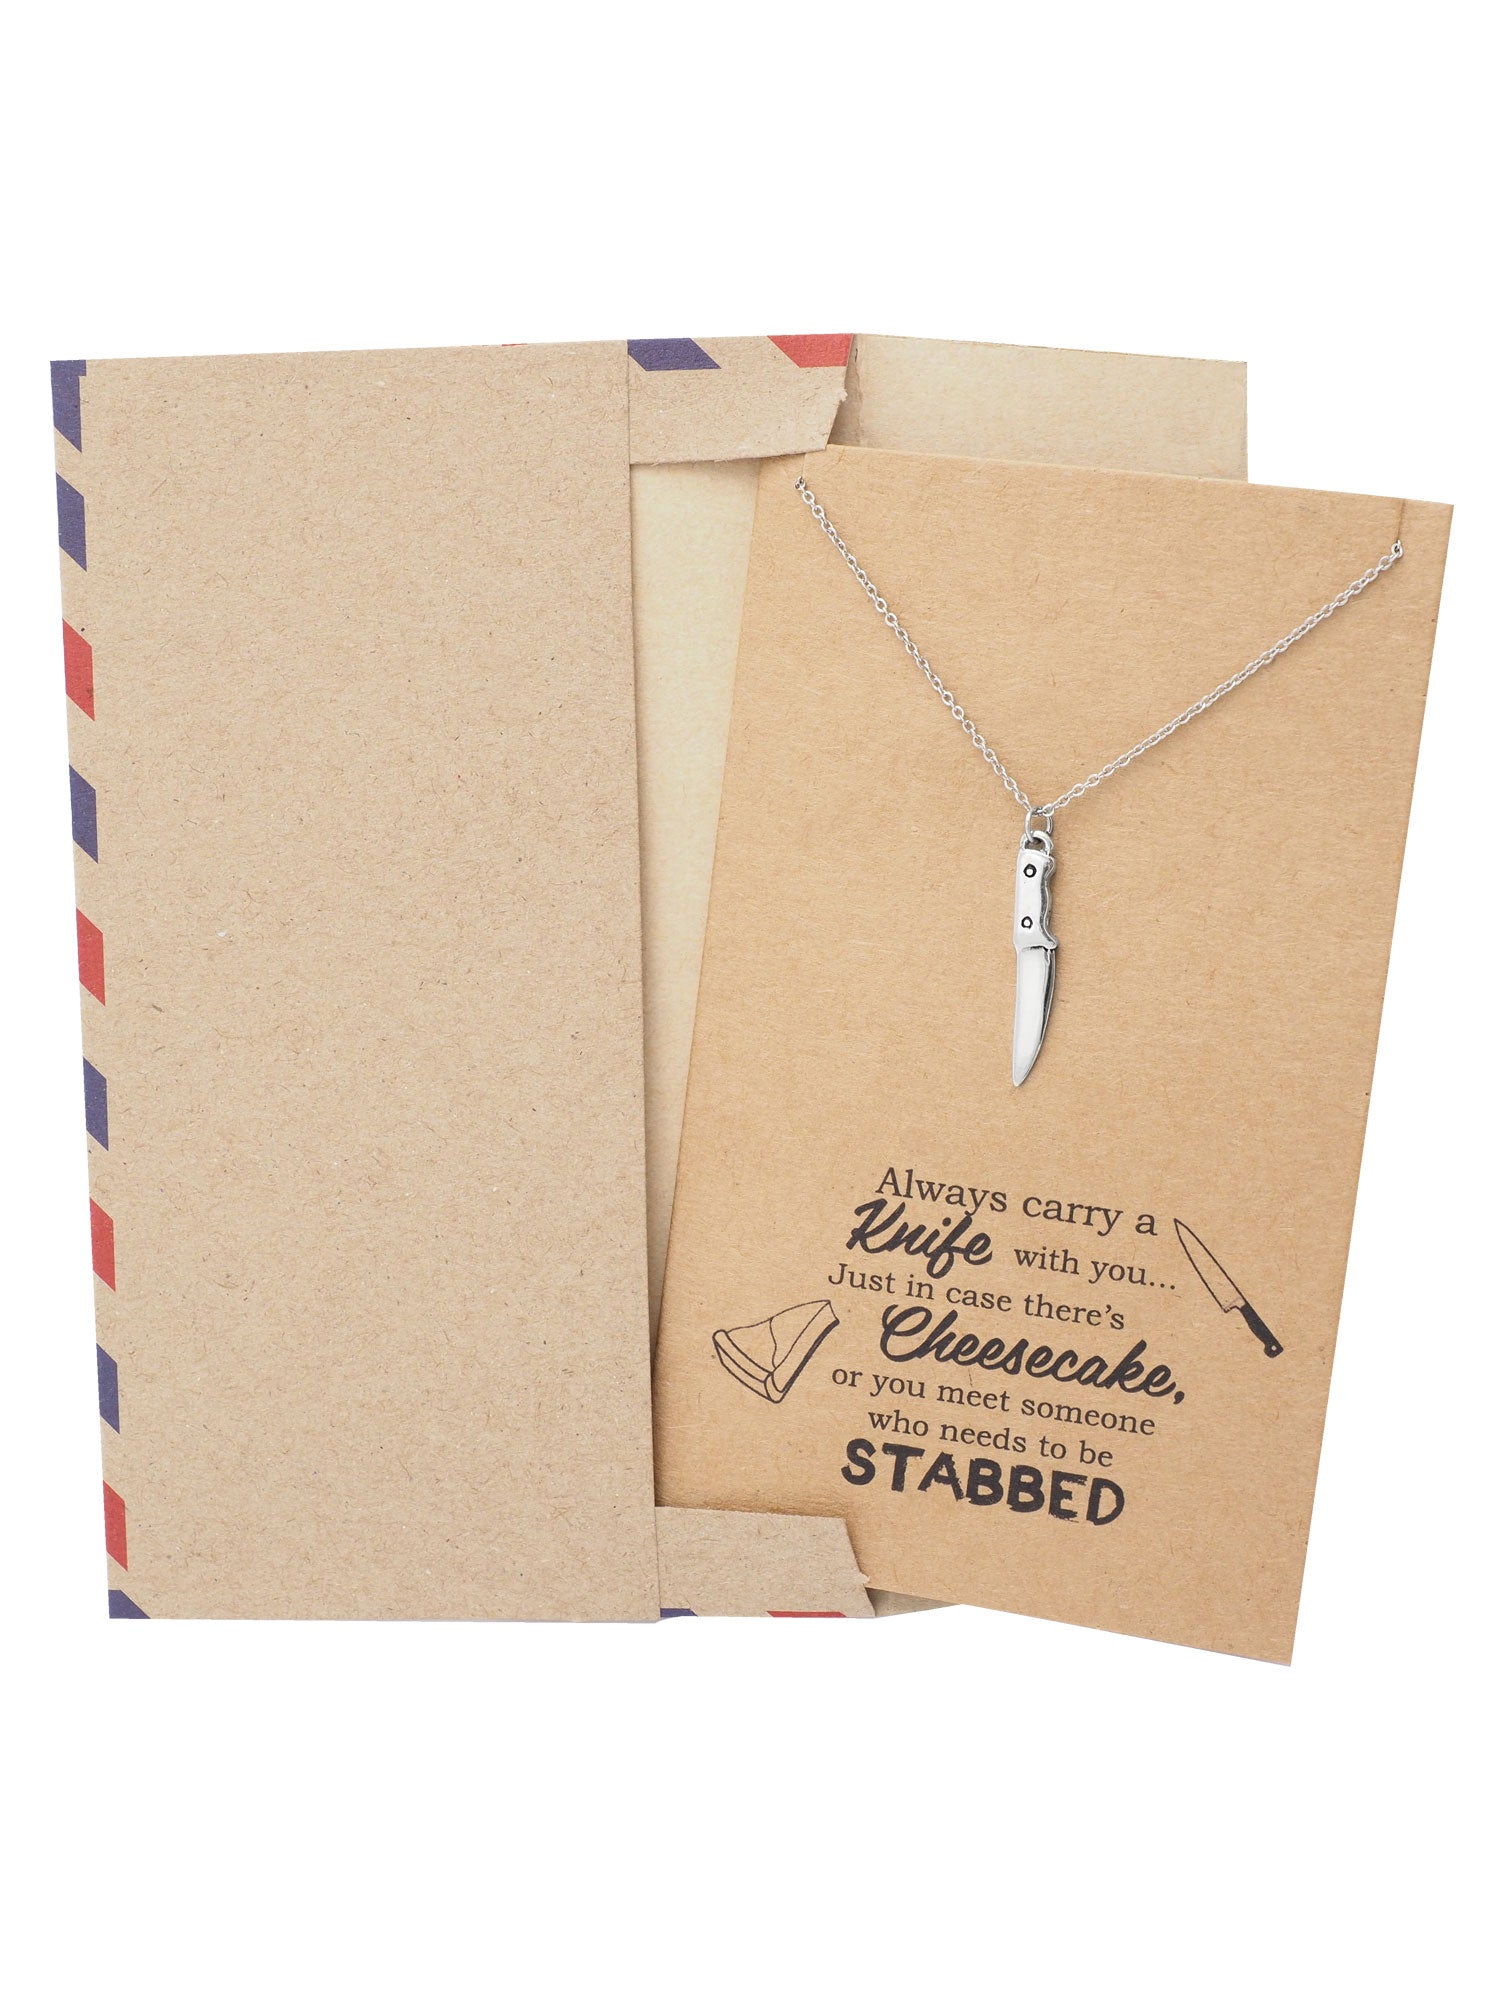 Quan Jewelry Mini Chef Knife Necklace, Gifts for Women, Men with Funny Quotes on Greeting Card -Silver Tone, Women's, Size: One Size